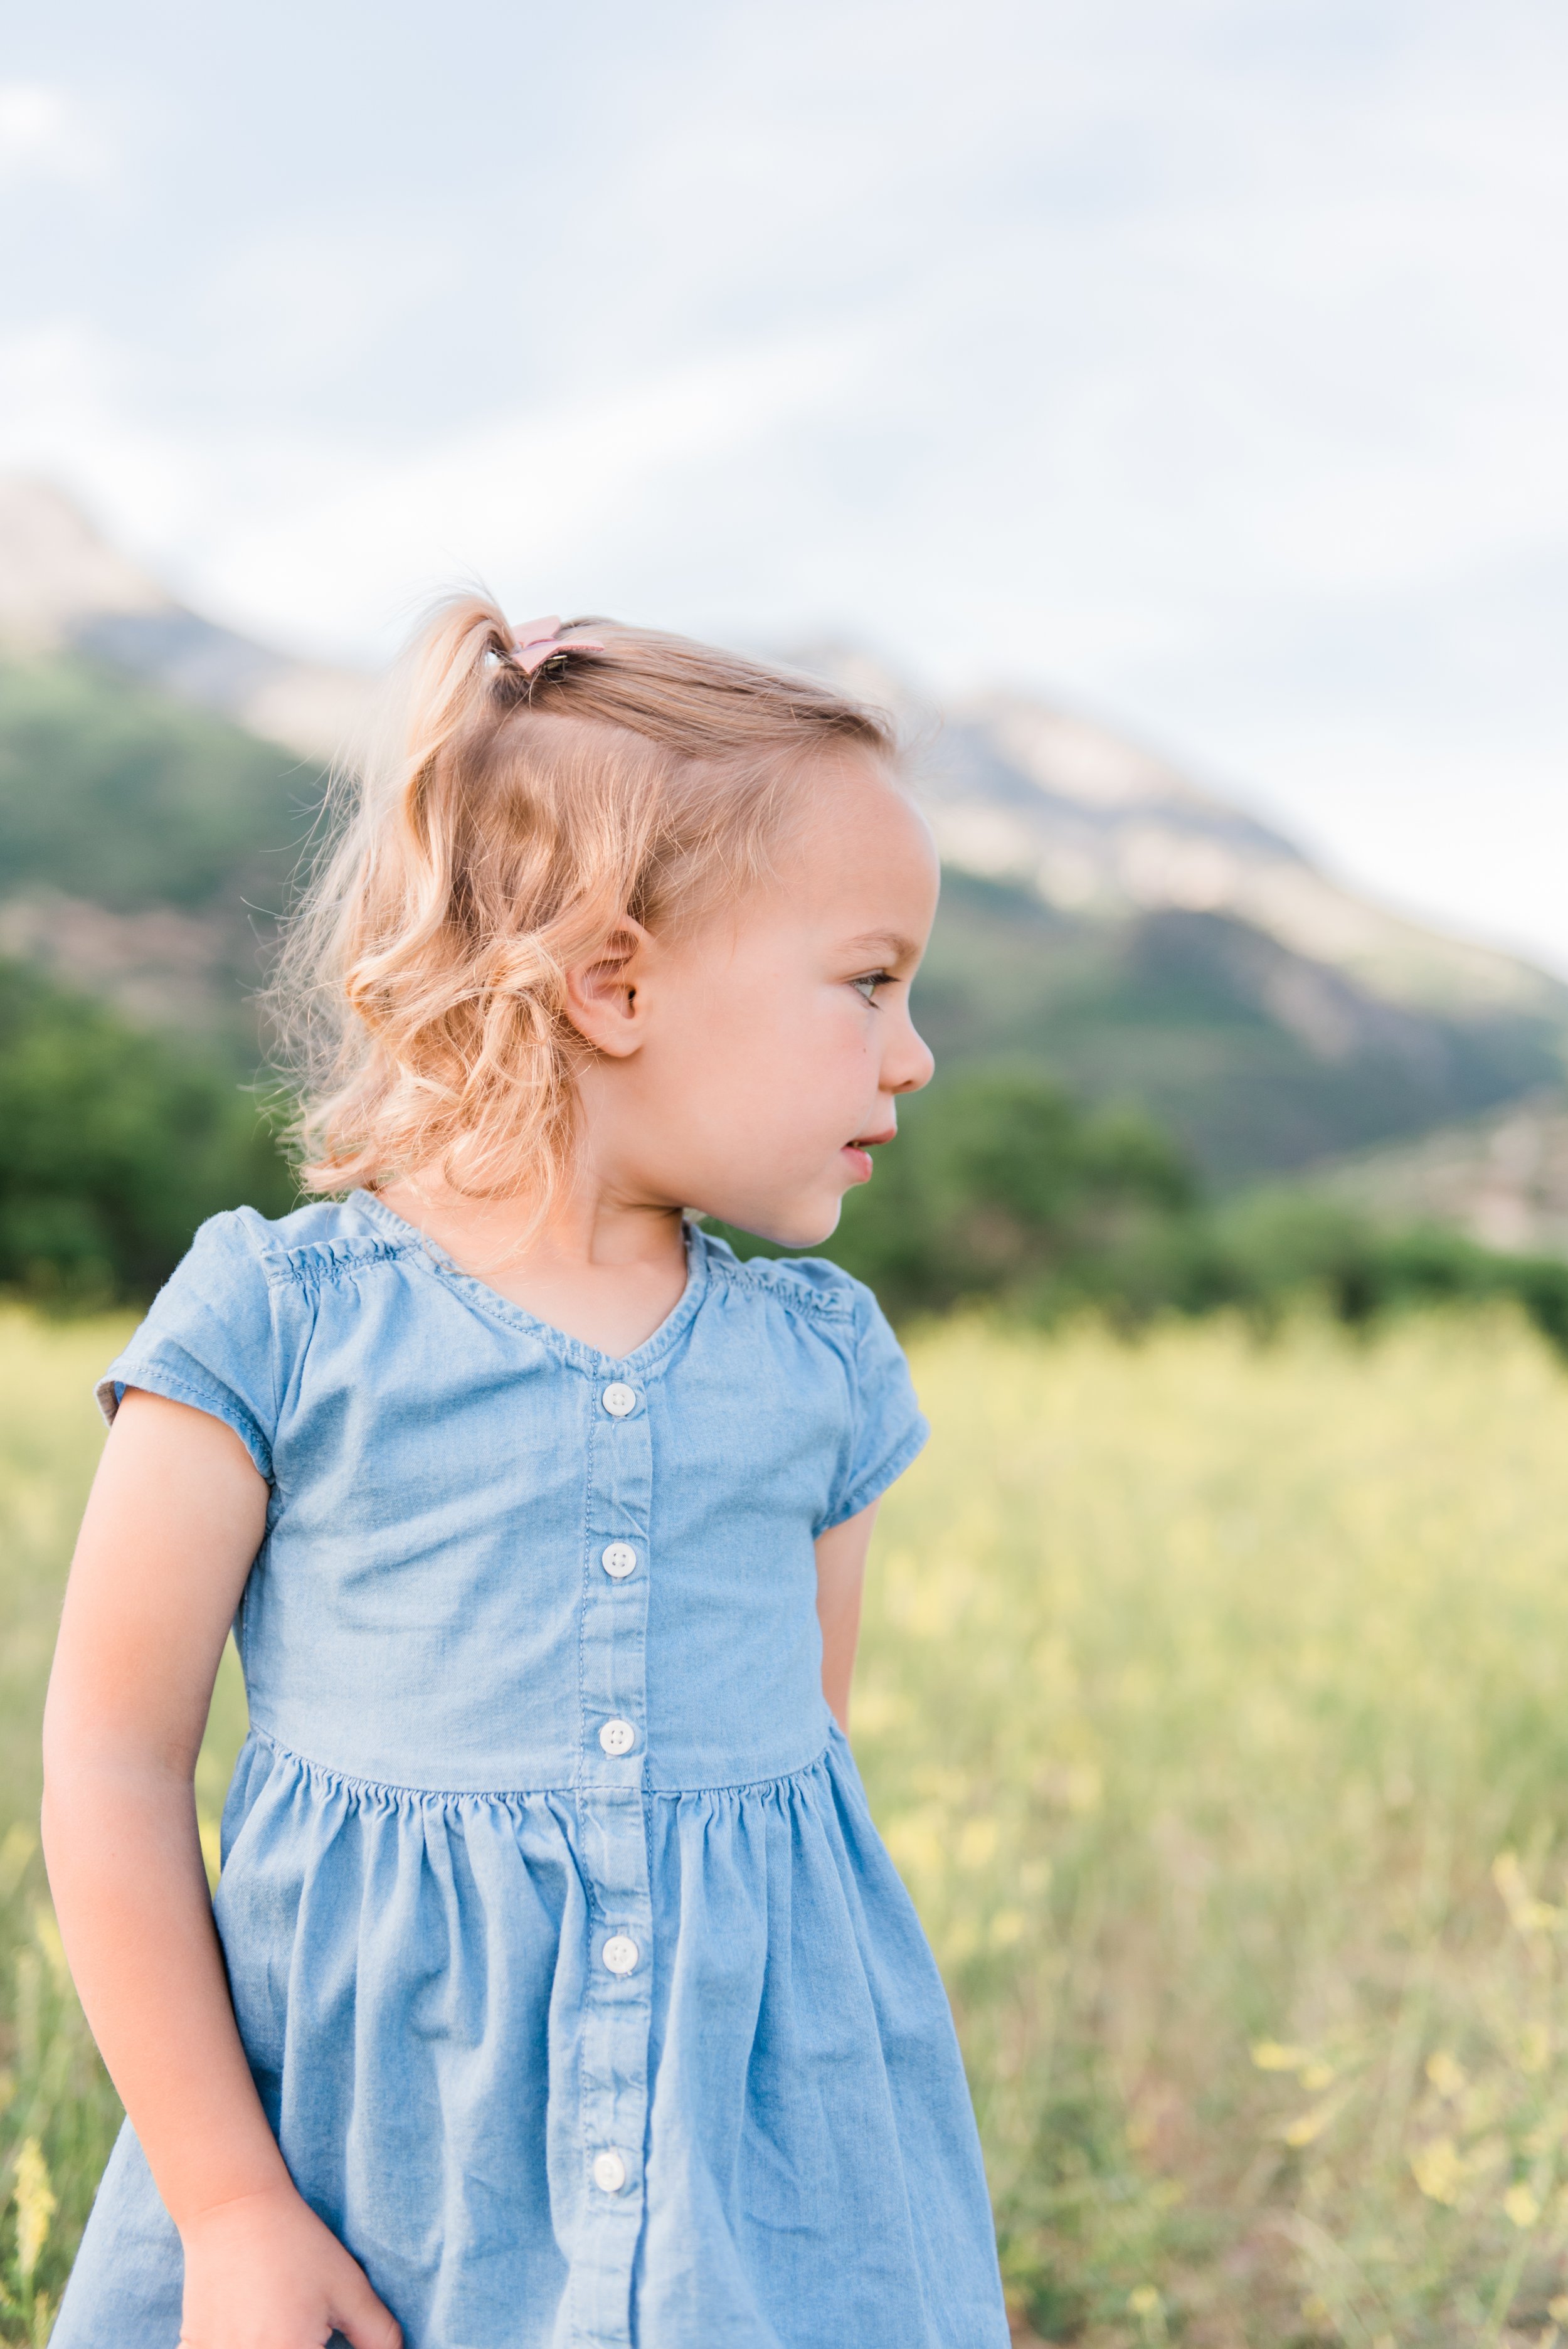  This stunning Fayetteville portrait highlights a little girl in a green field with beautiful mountains in the background. #marylandfamilyphotographer #onlinephotographycourse #photographytips #familyphotosession #diyfamilyphotos #kidportraits #girlo